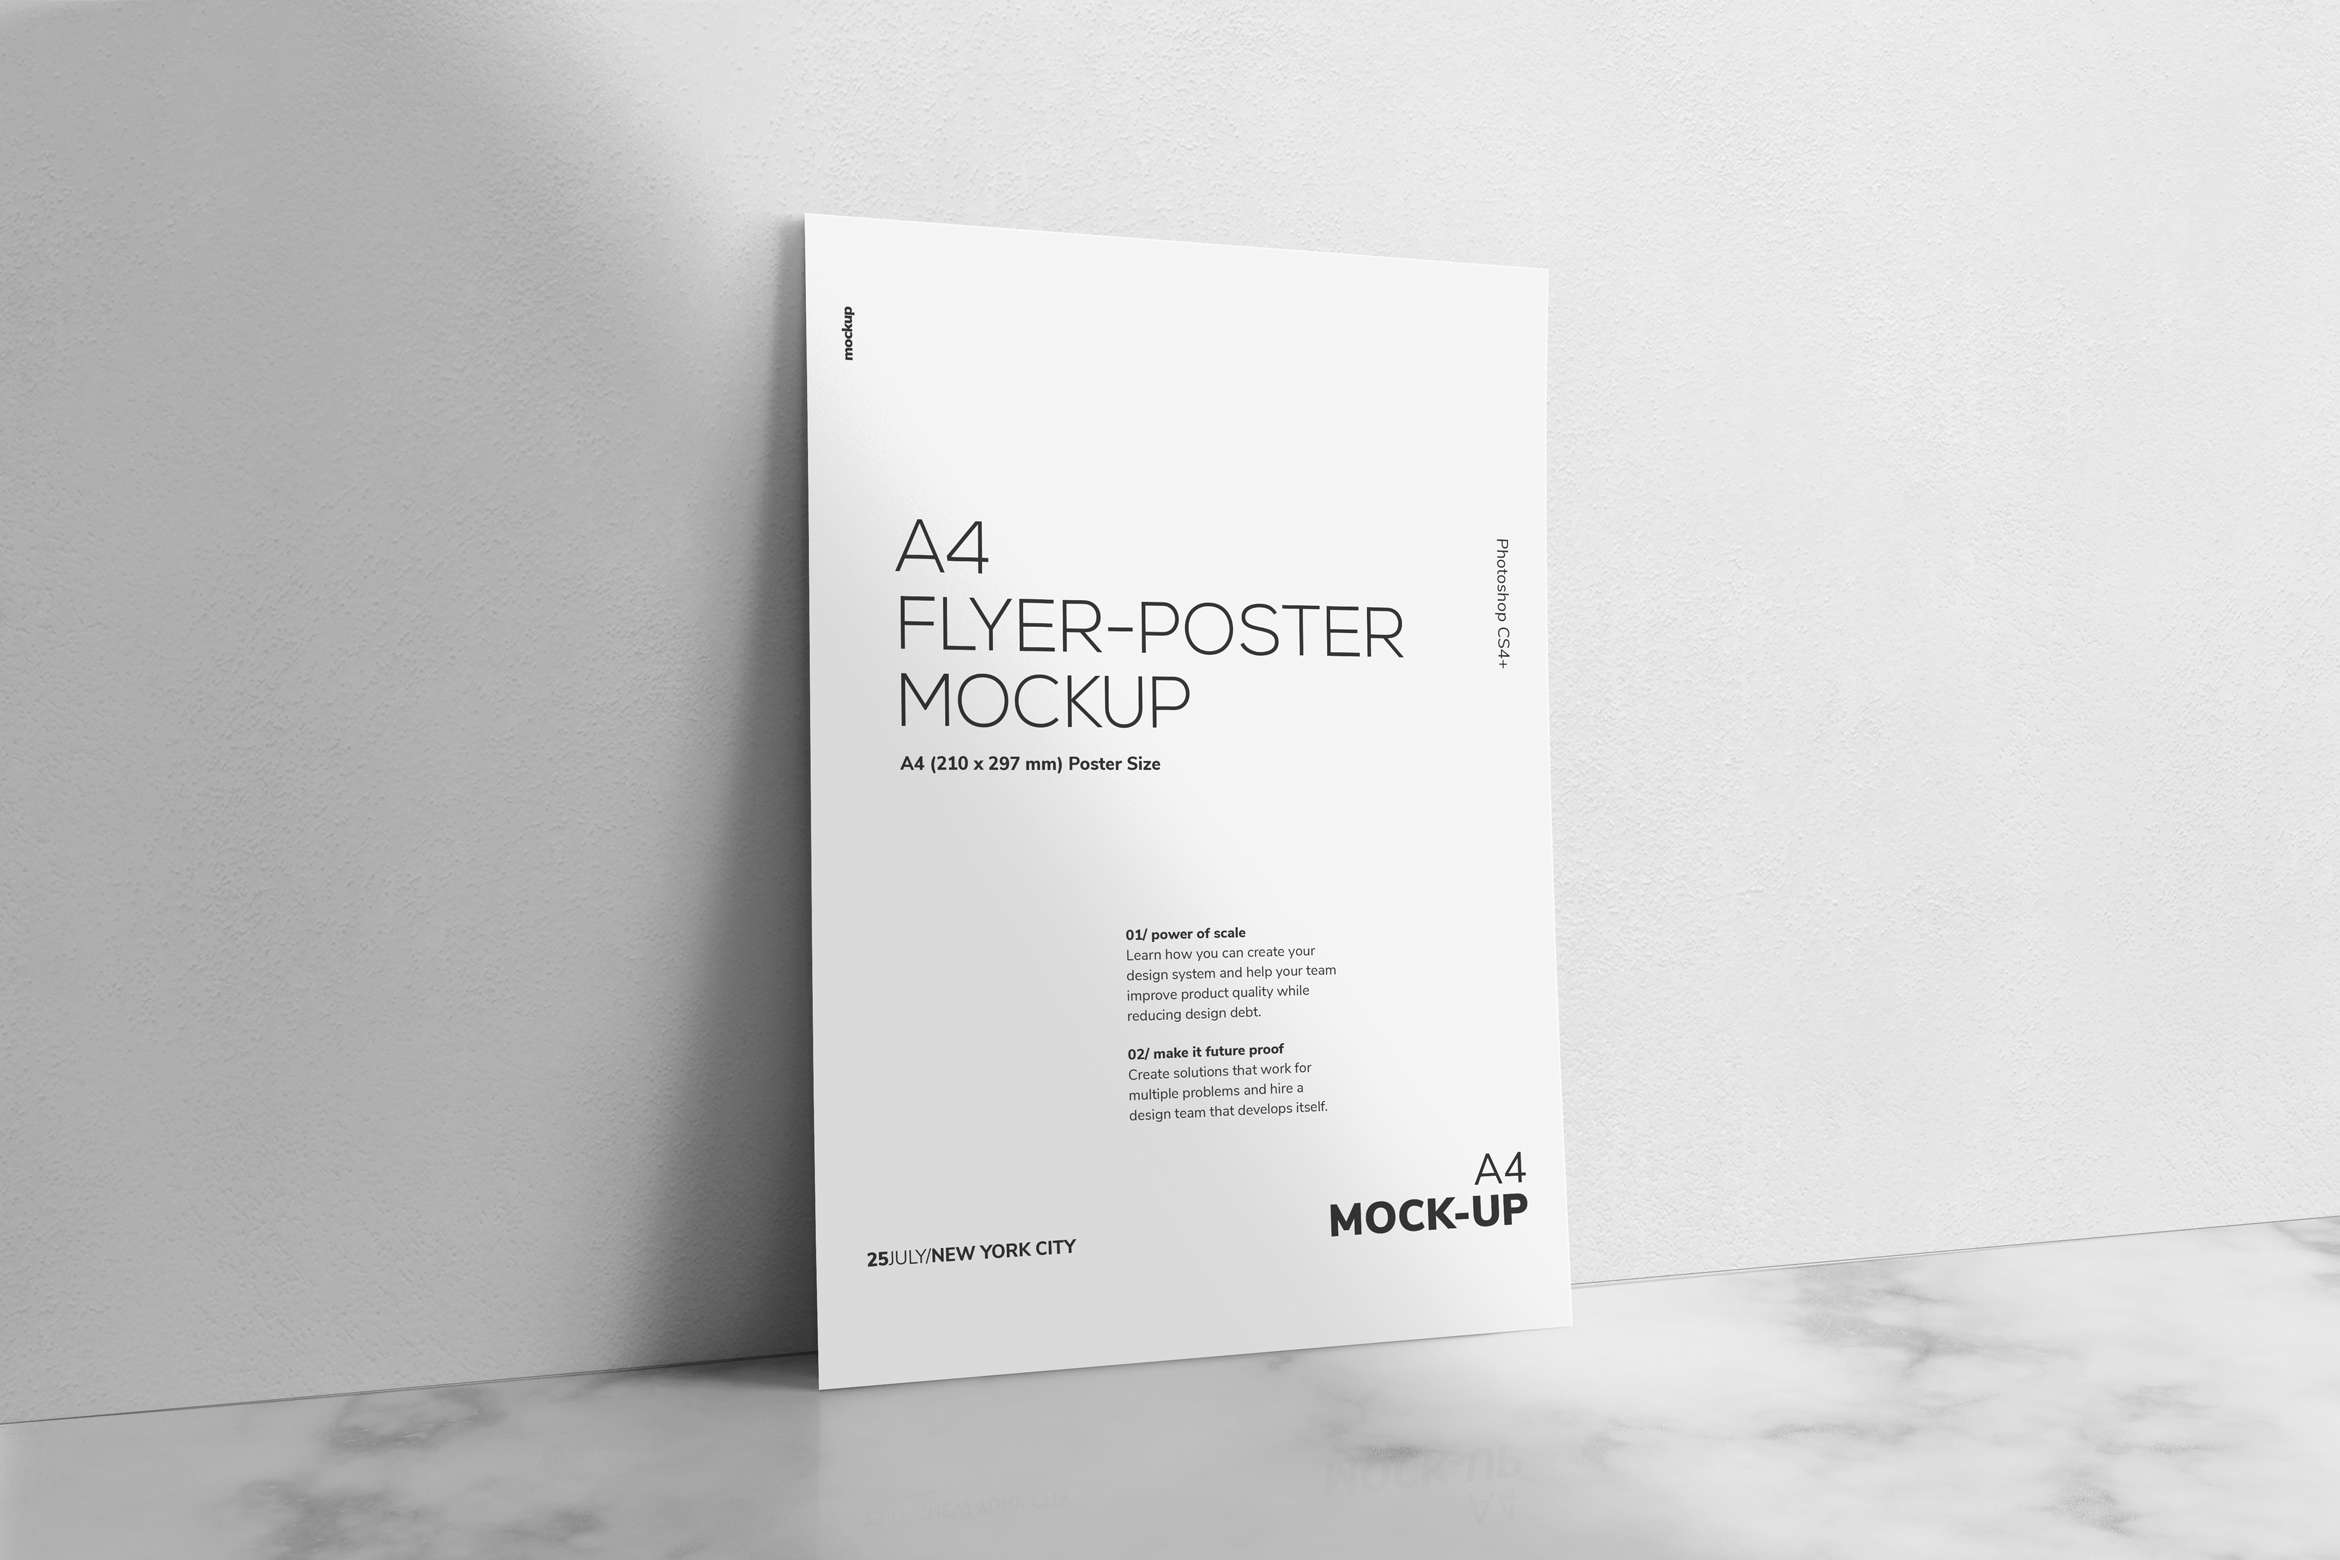 Leaning A4 Flyer-poster Mockup